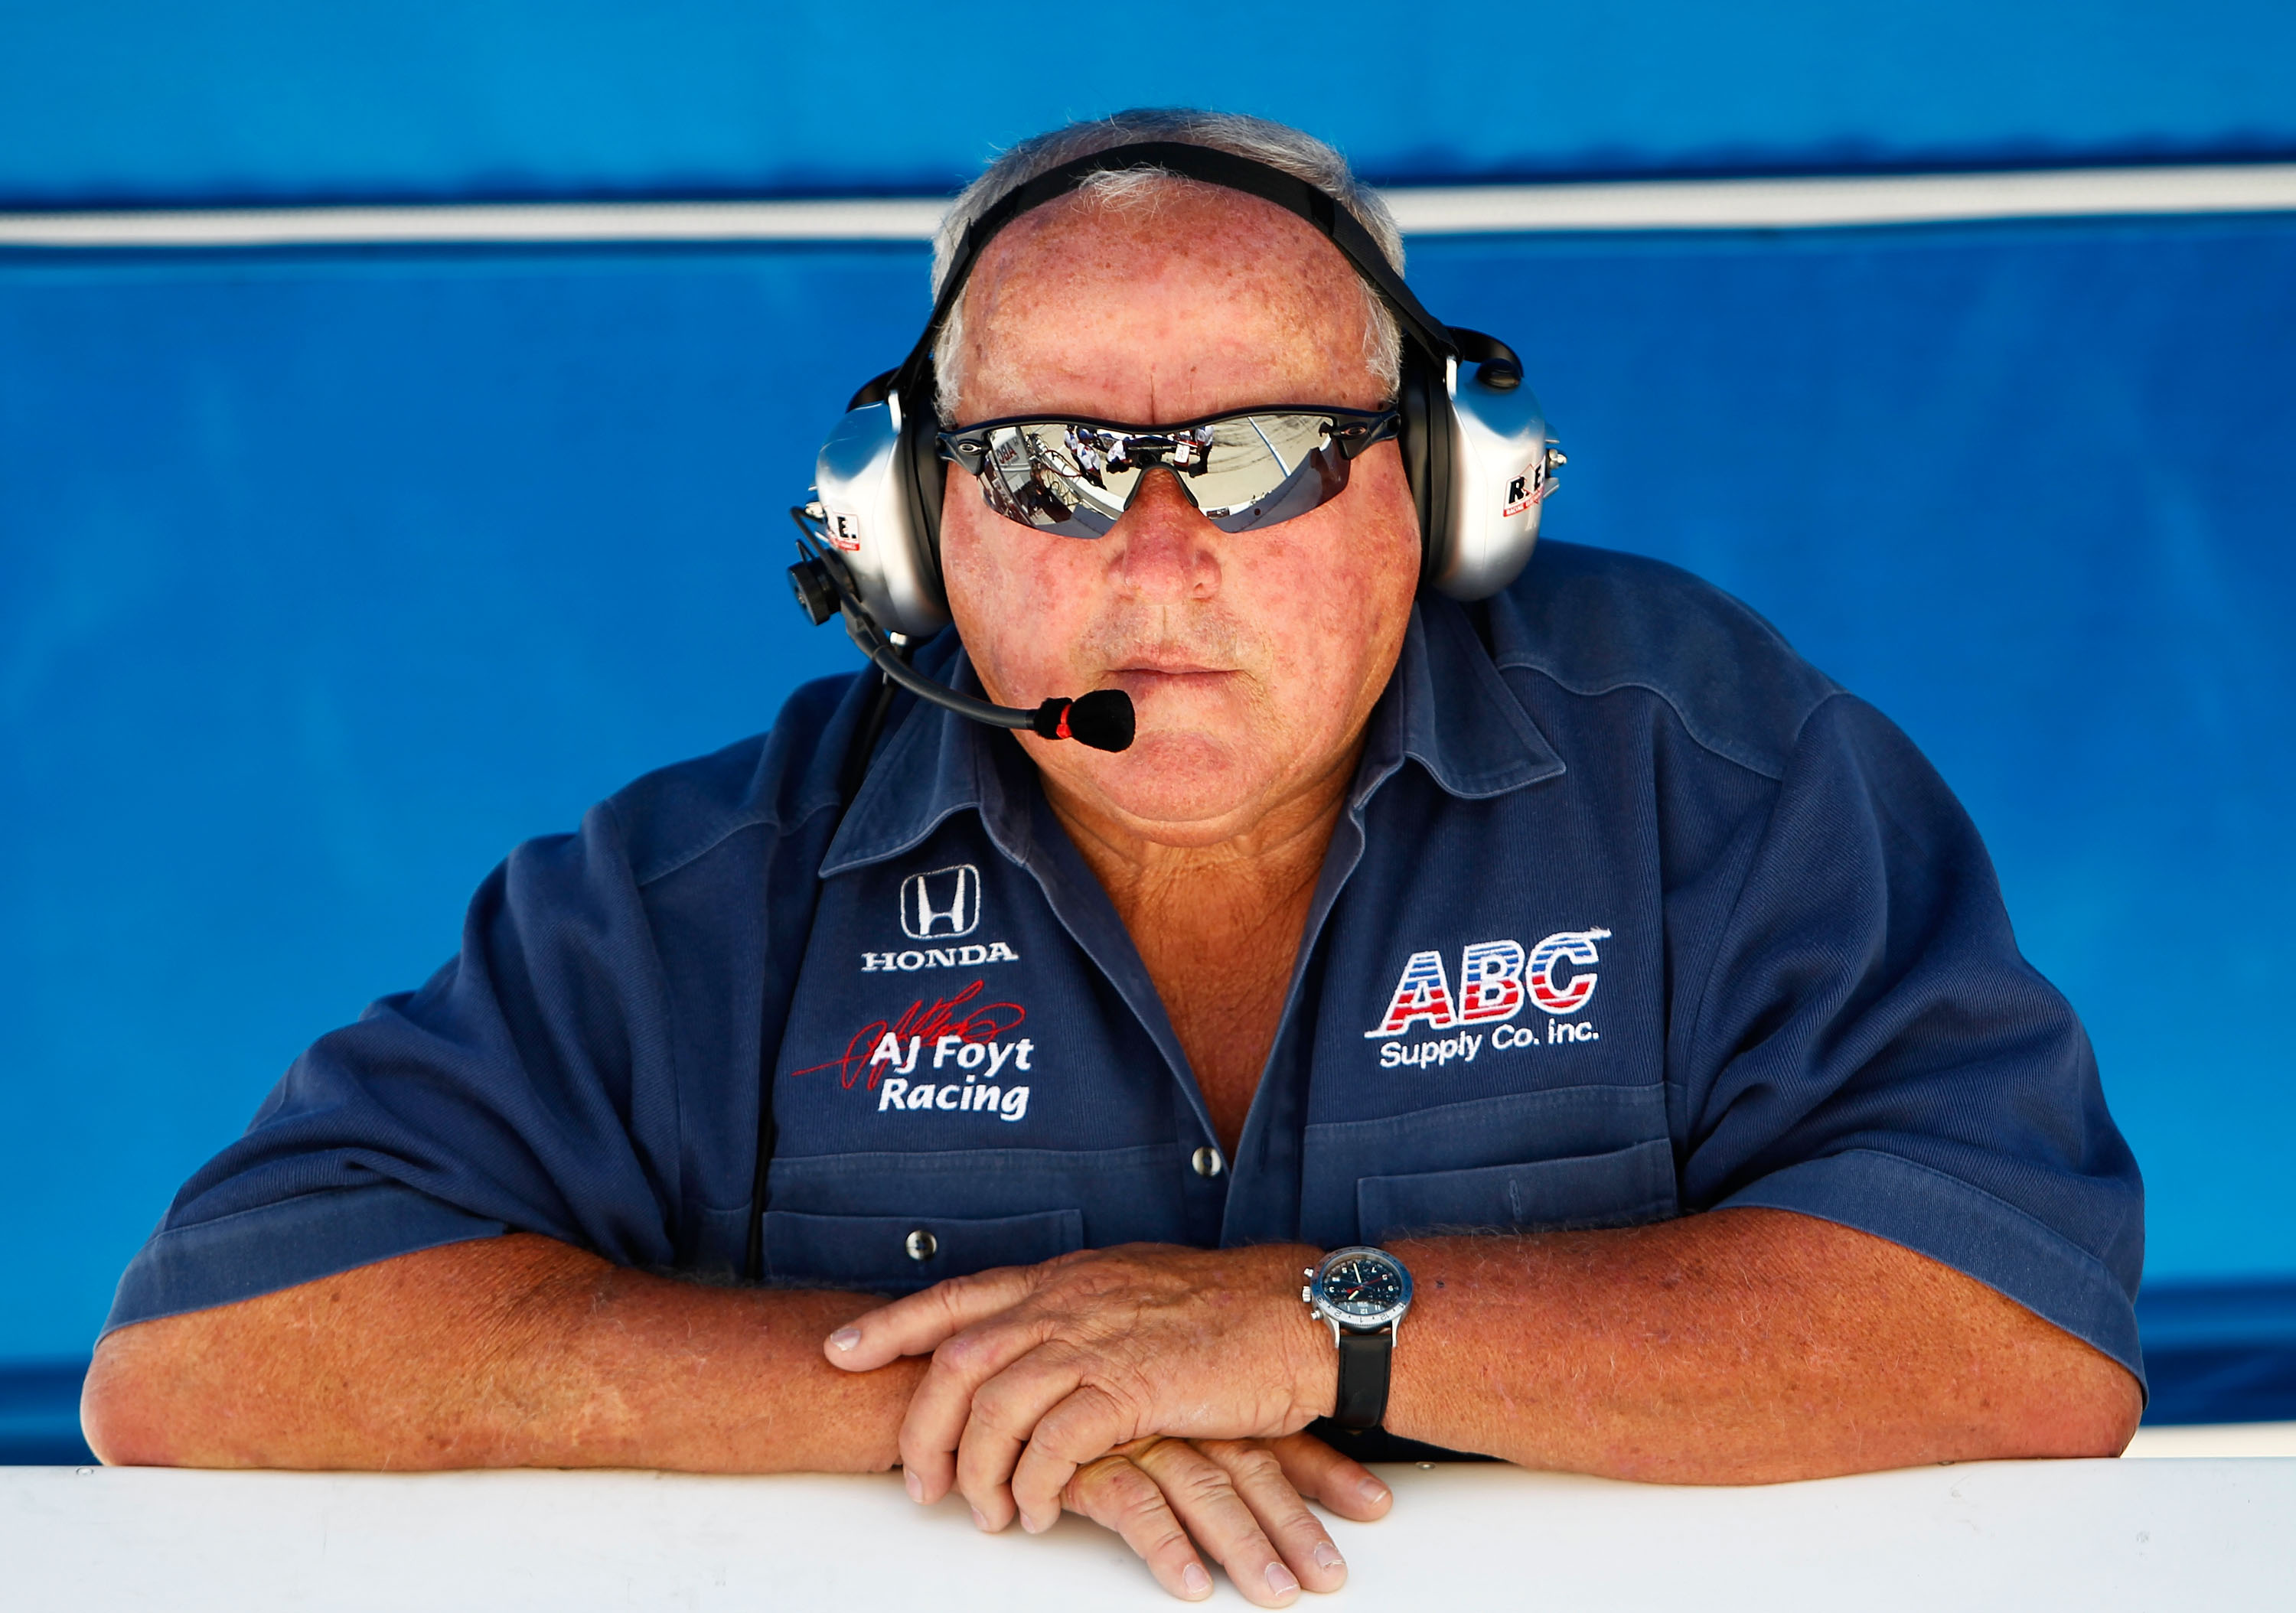 FORT WORTH, TX - JUNE 04:  Team owner A.J. Foyt watches during practice for the IZOD IndyCar Series Firestone 550k at Texas Motor Speedway June 4, 2010 in Fort Worth, Texas.  (Photo by Jonathan Ferrey/Getty Images)